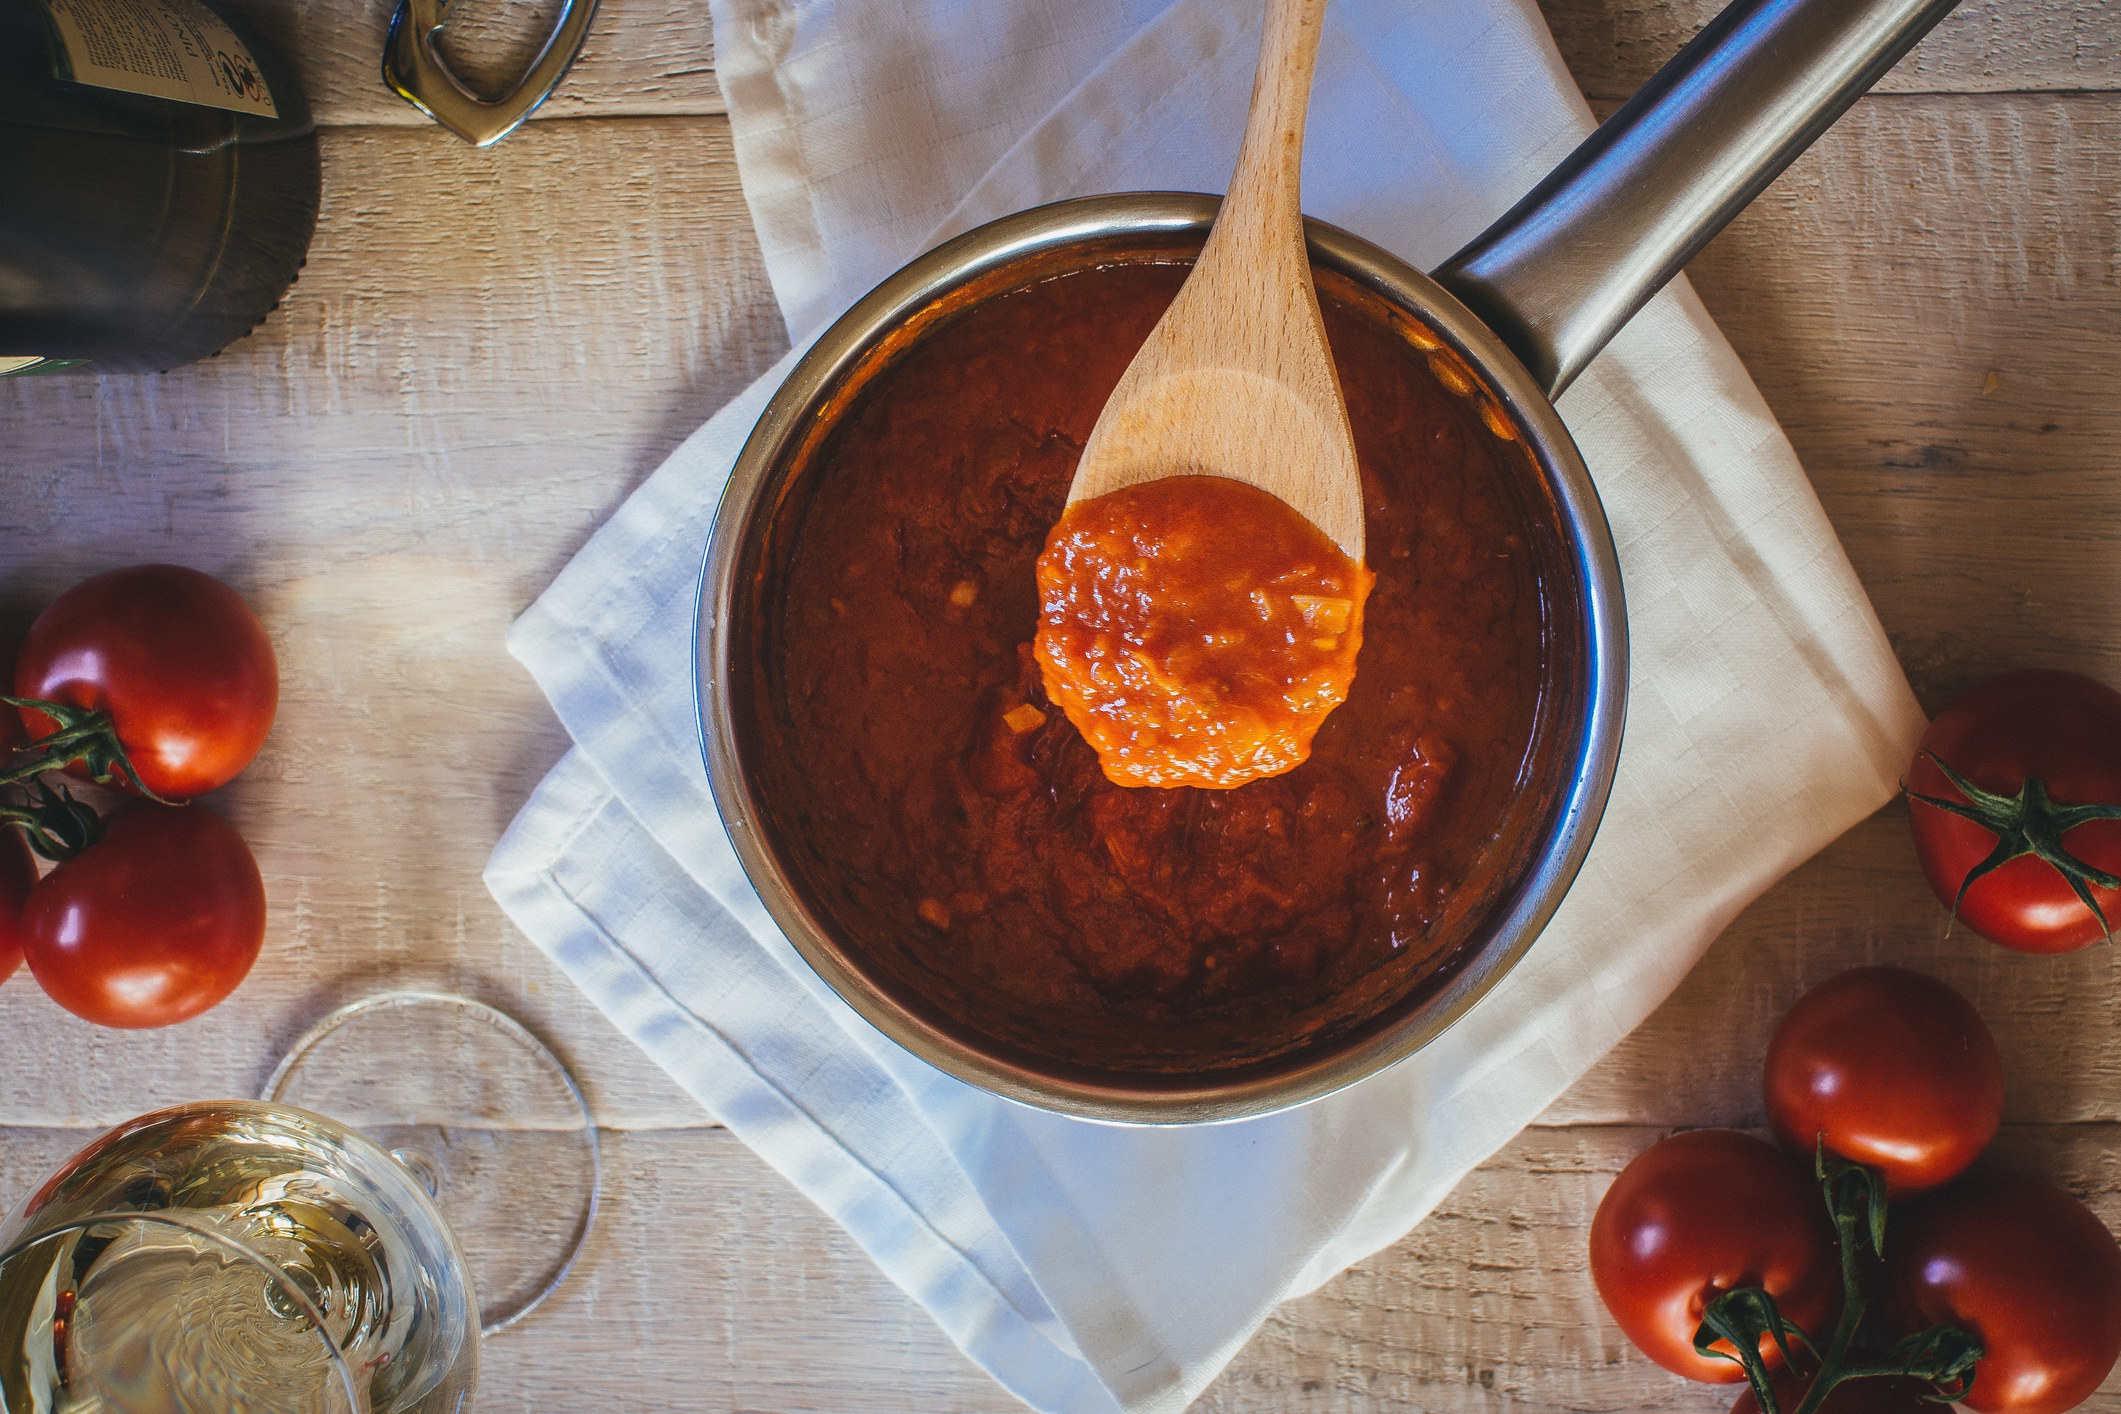 Cooking tomato sauce in a pan.